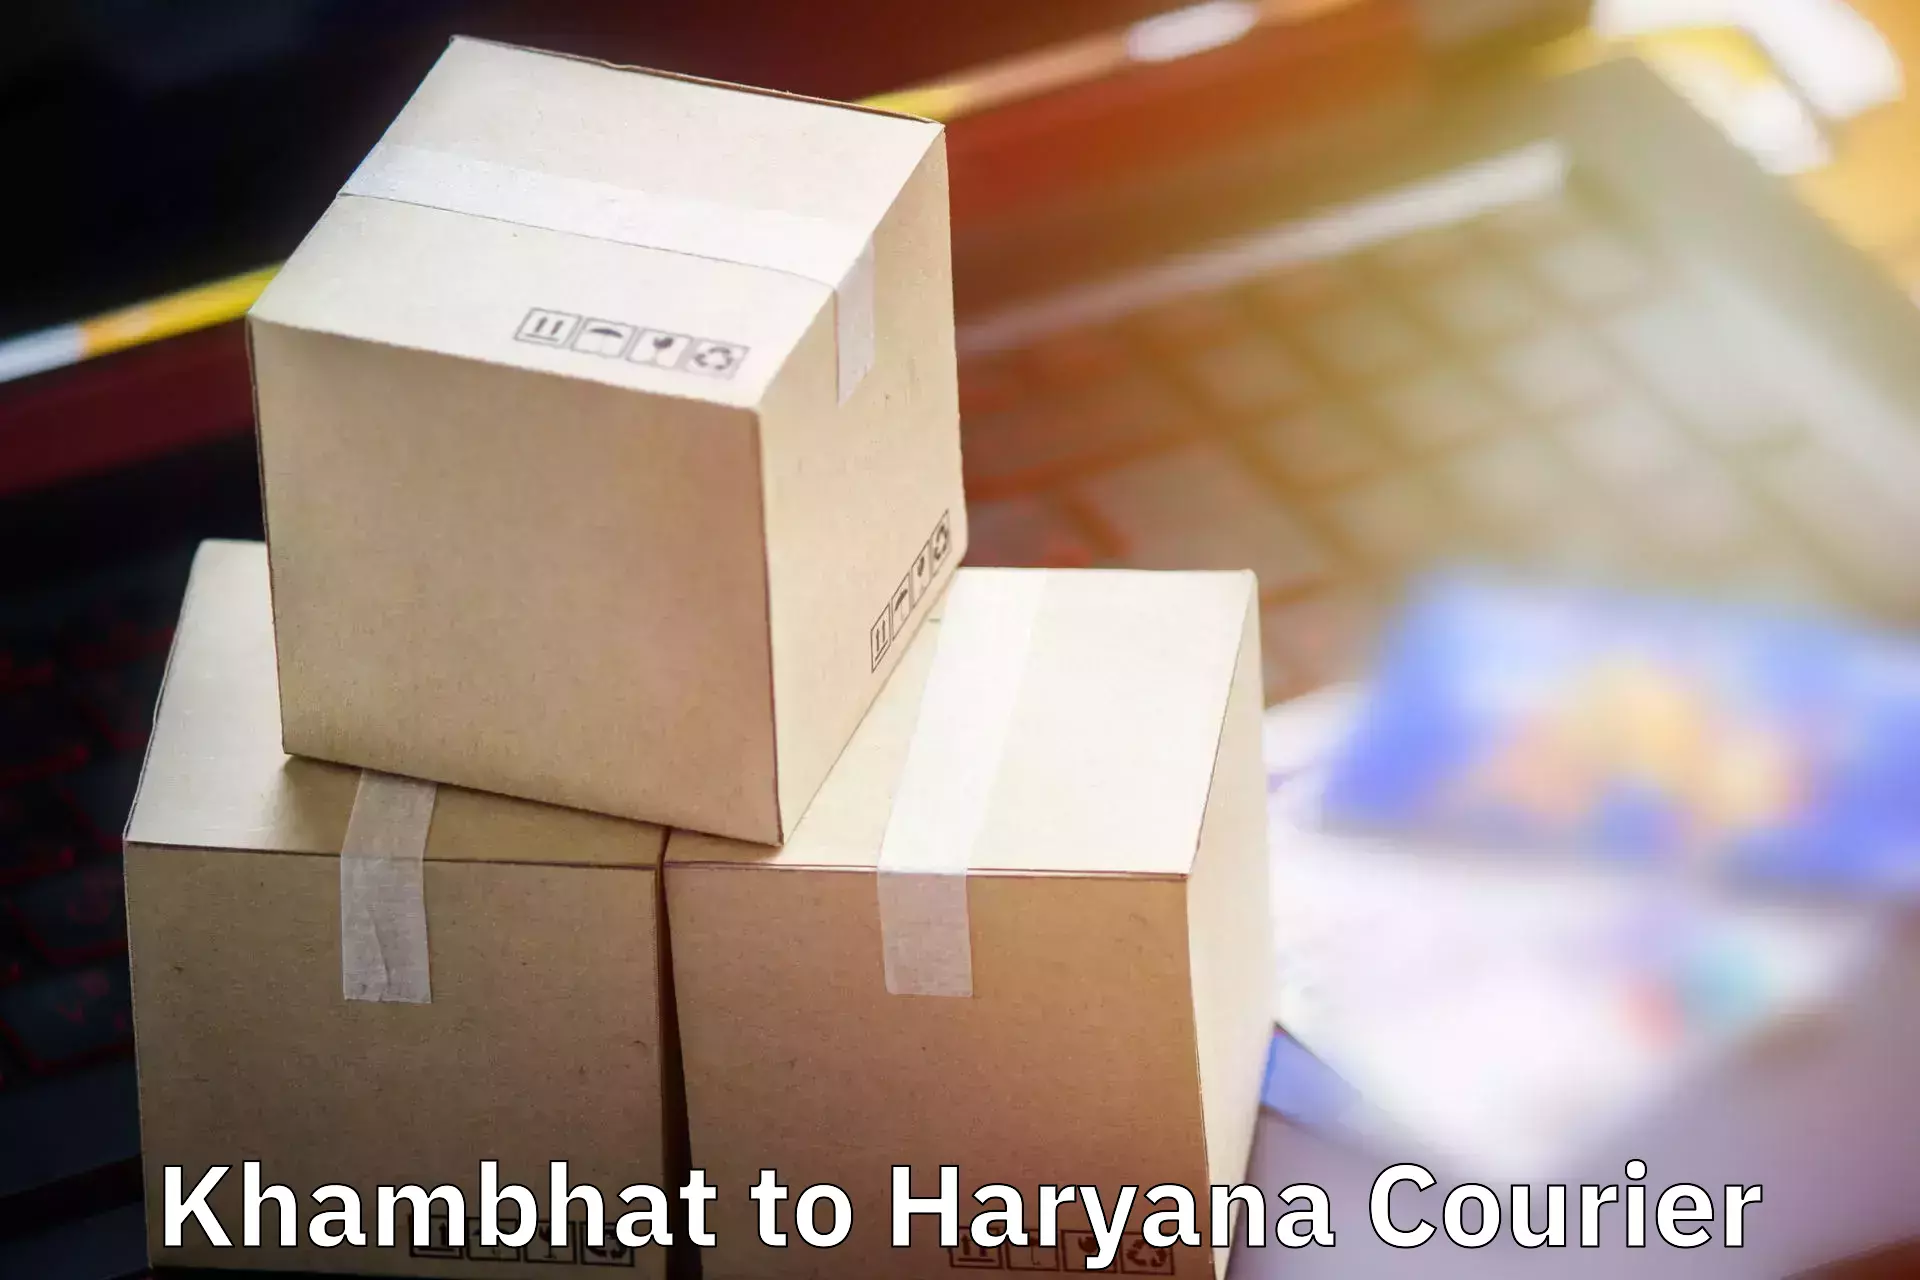 Baggage shipping experience in Khambhat to Gurgaon